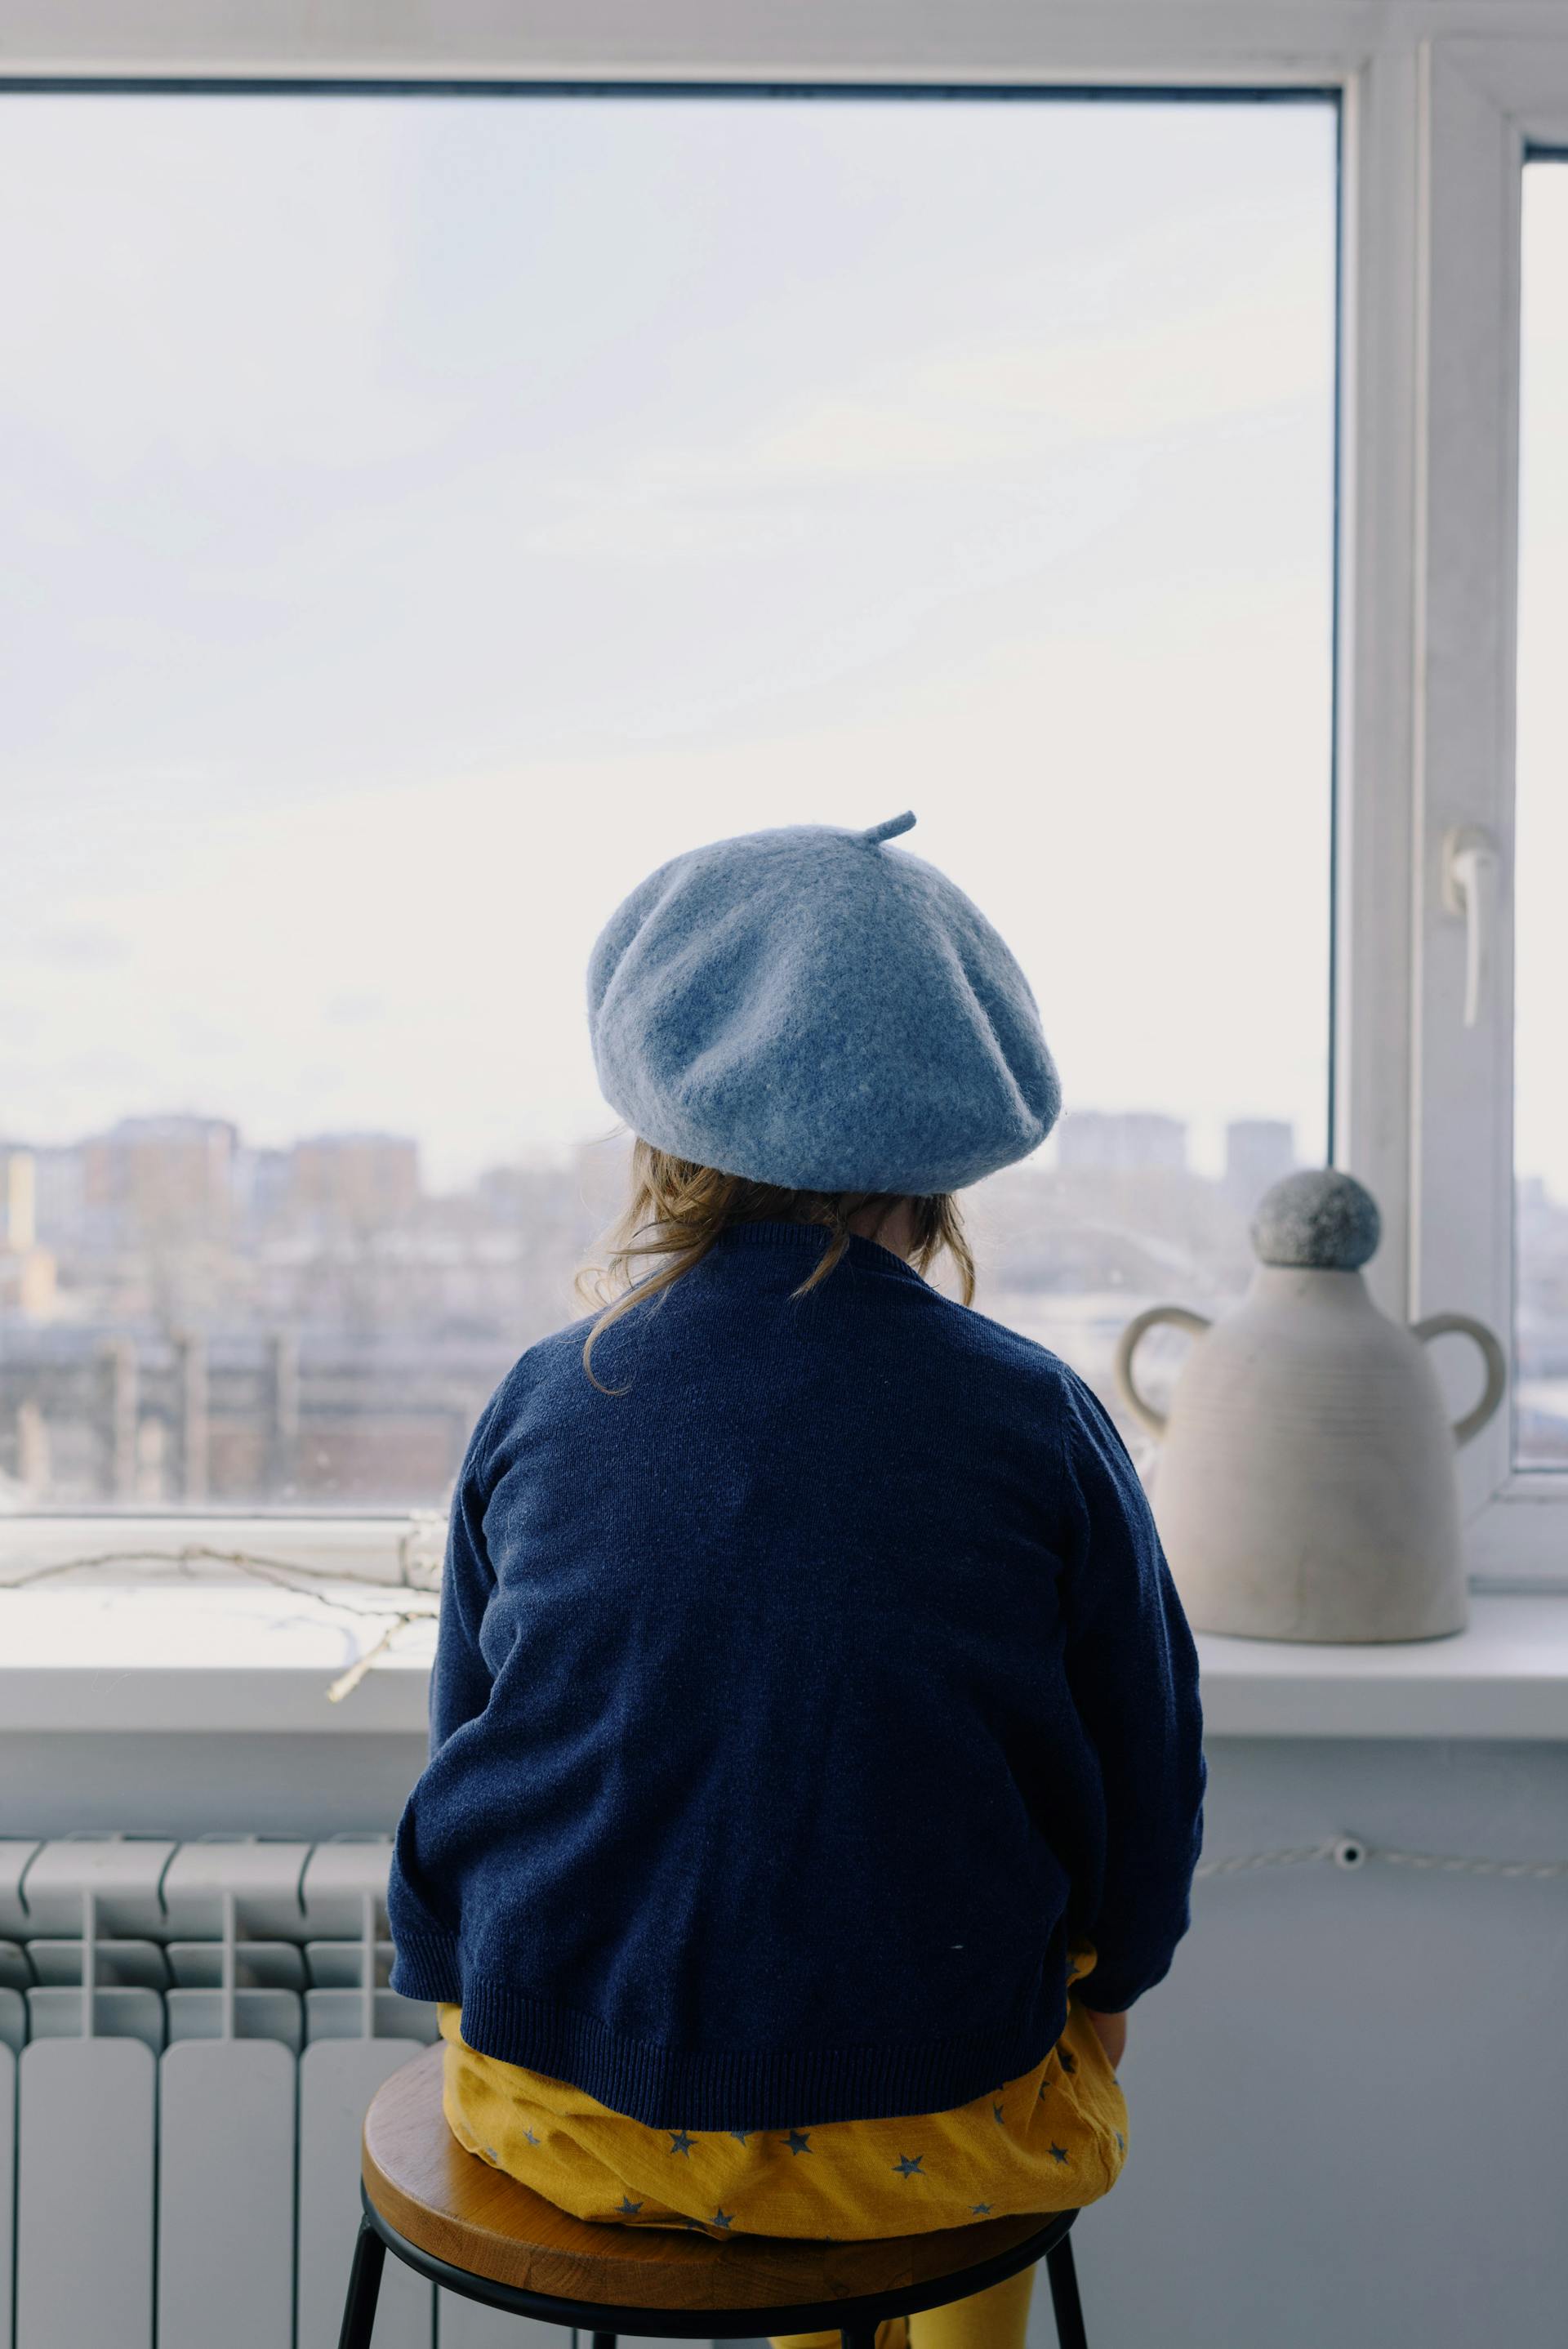 A little girl in a beret looking outside from the window | Source: Pexels